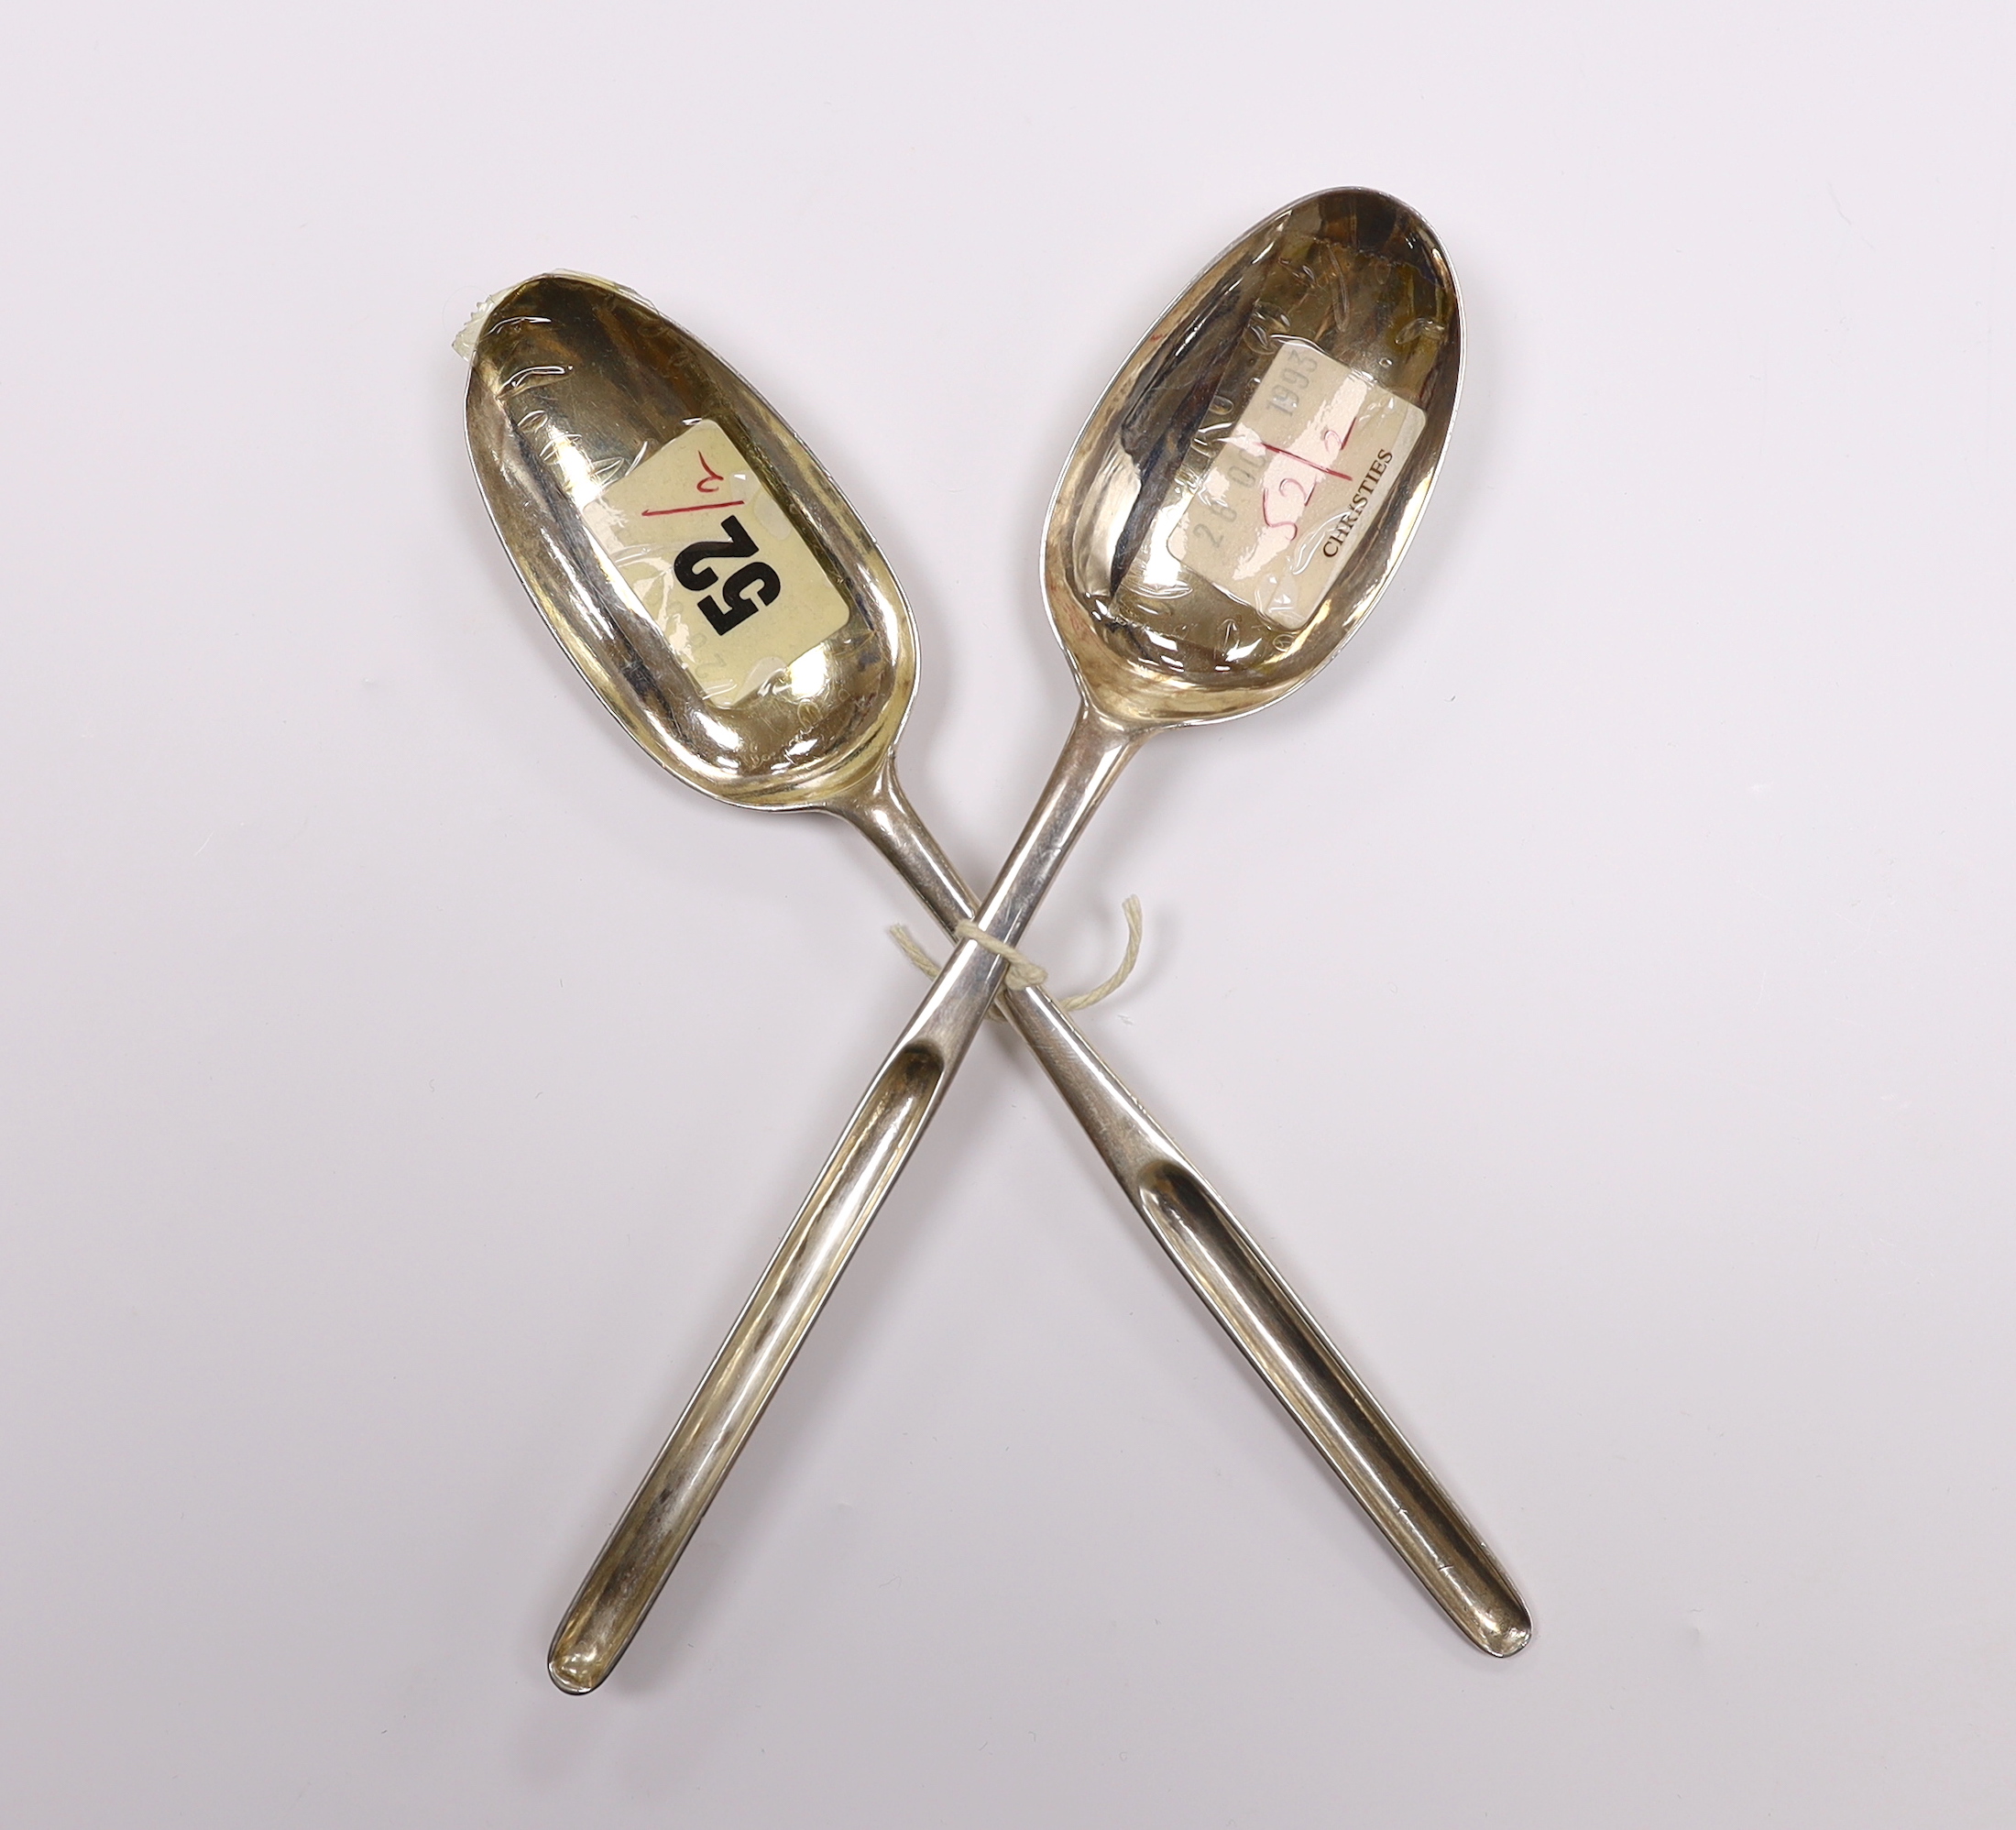 Two 18th century silver combinations marrow scoop spoons, William Matthew I, London, 1703, with rat tail back and later with rubbed marks.